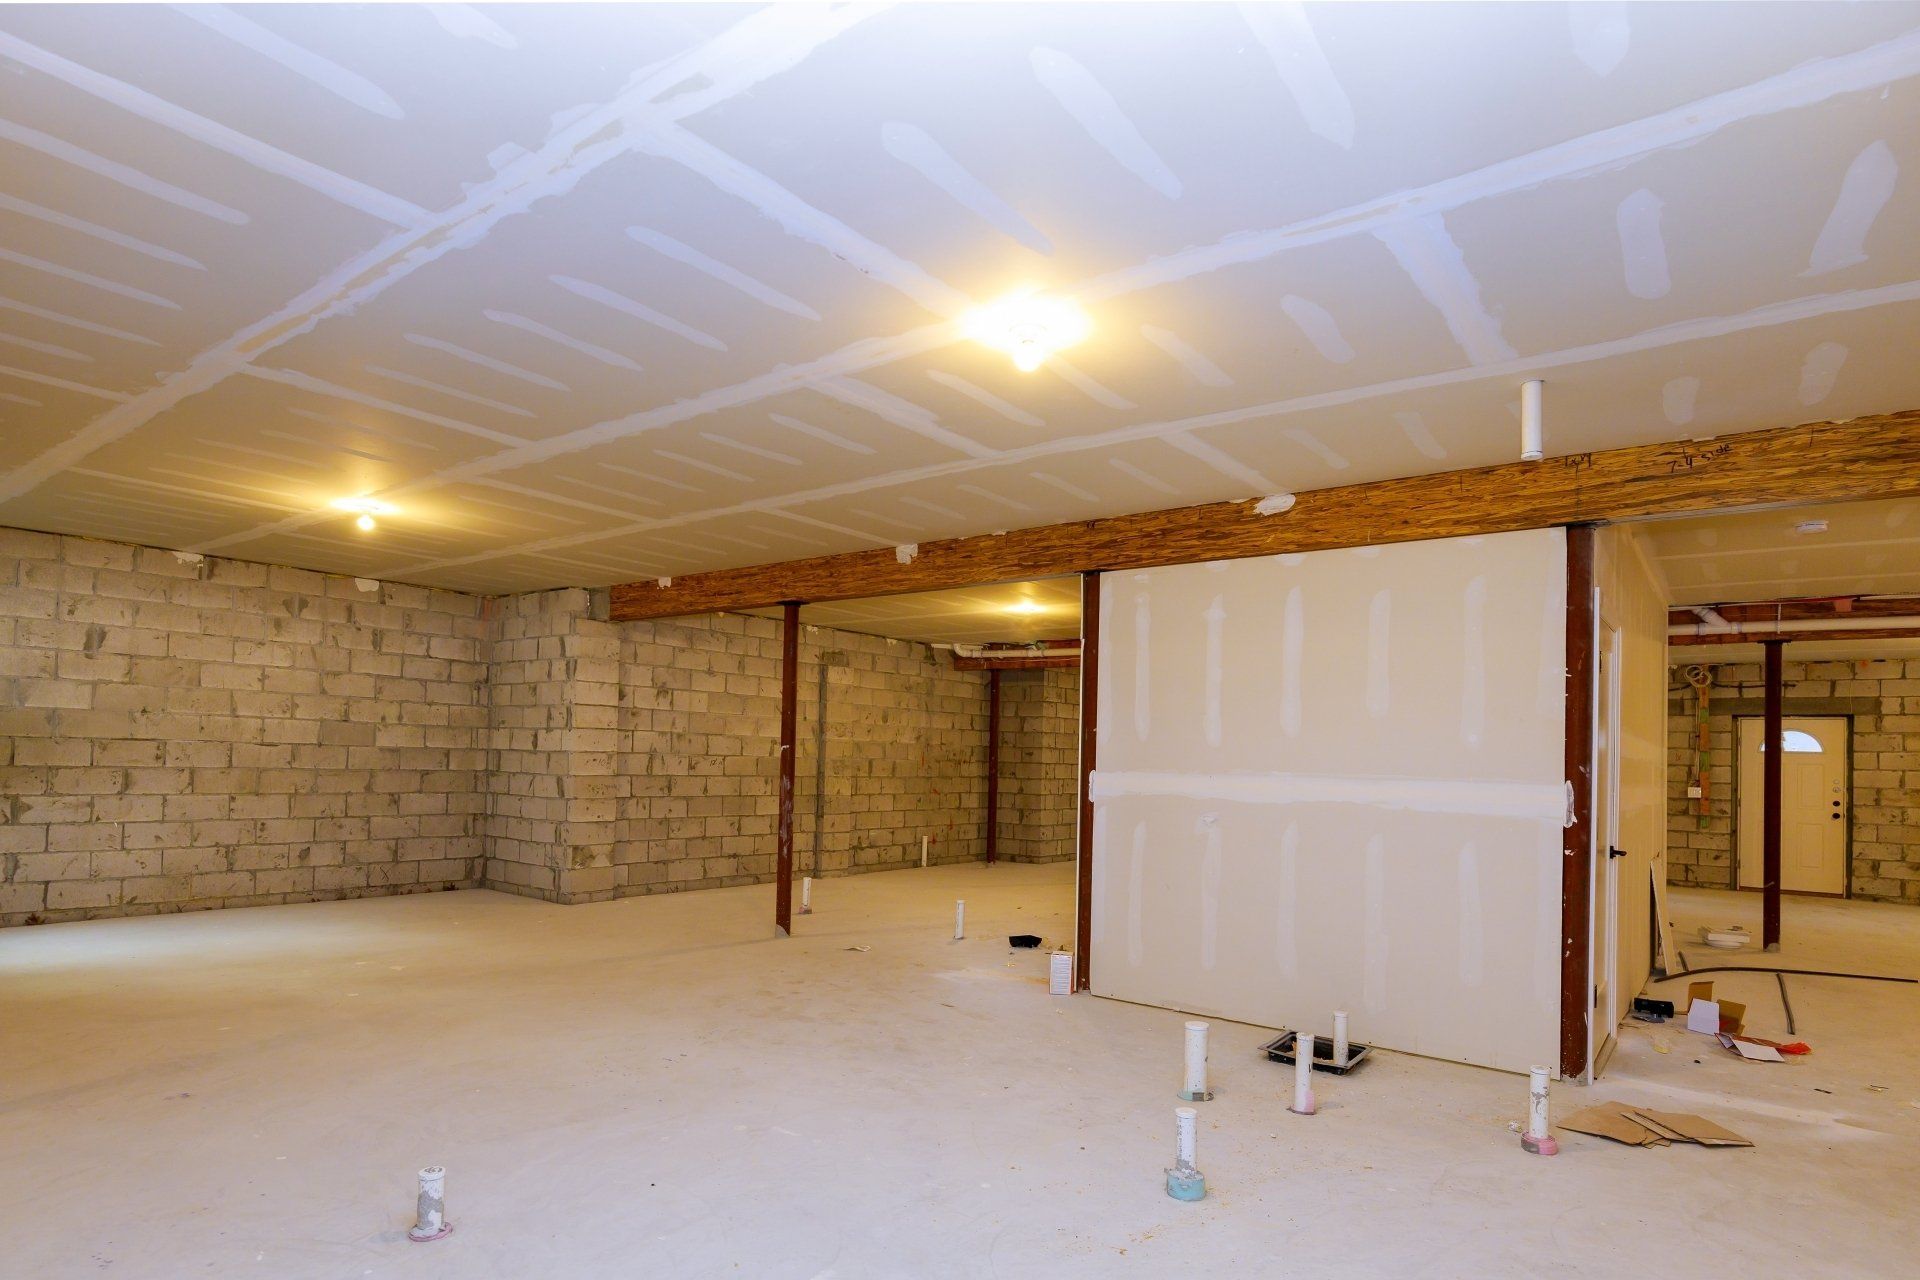 unfinished basement ready for storage